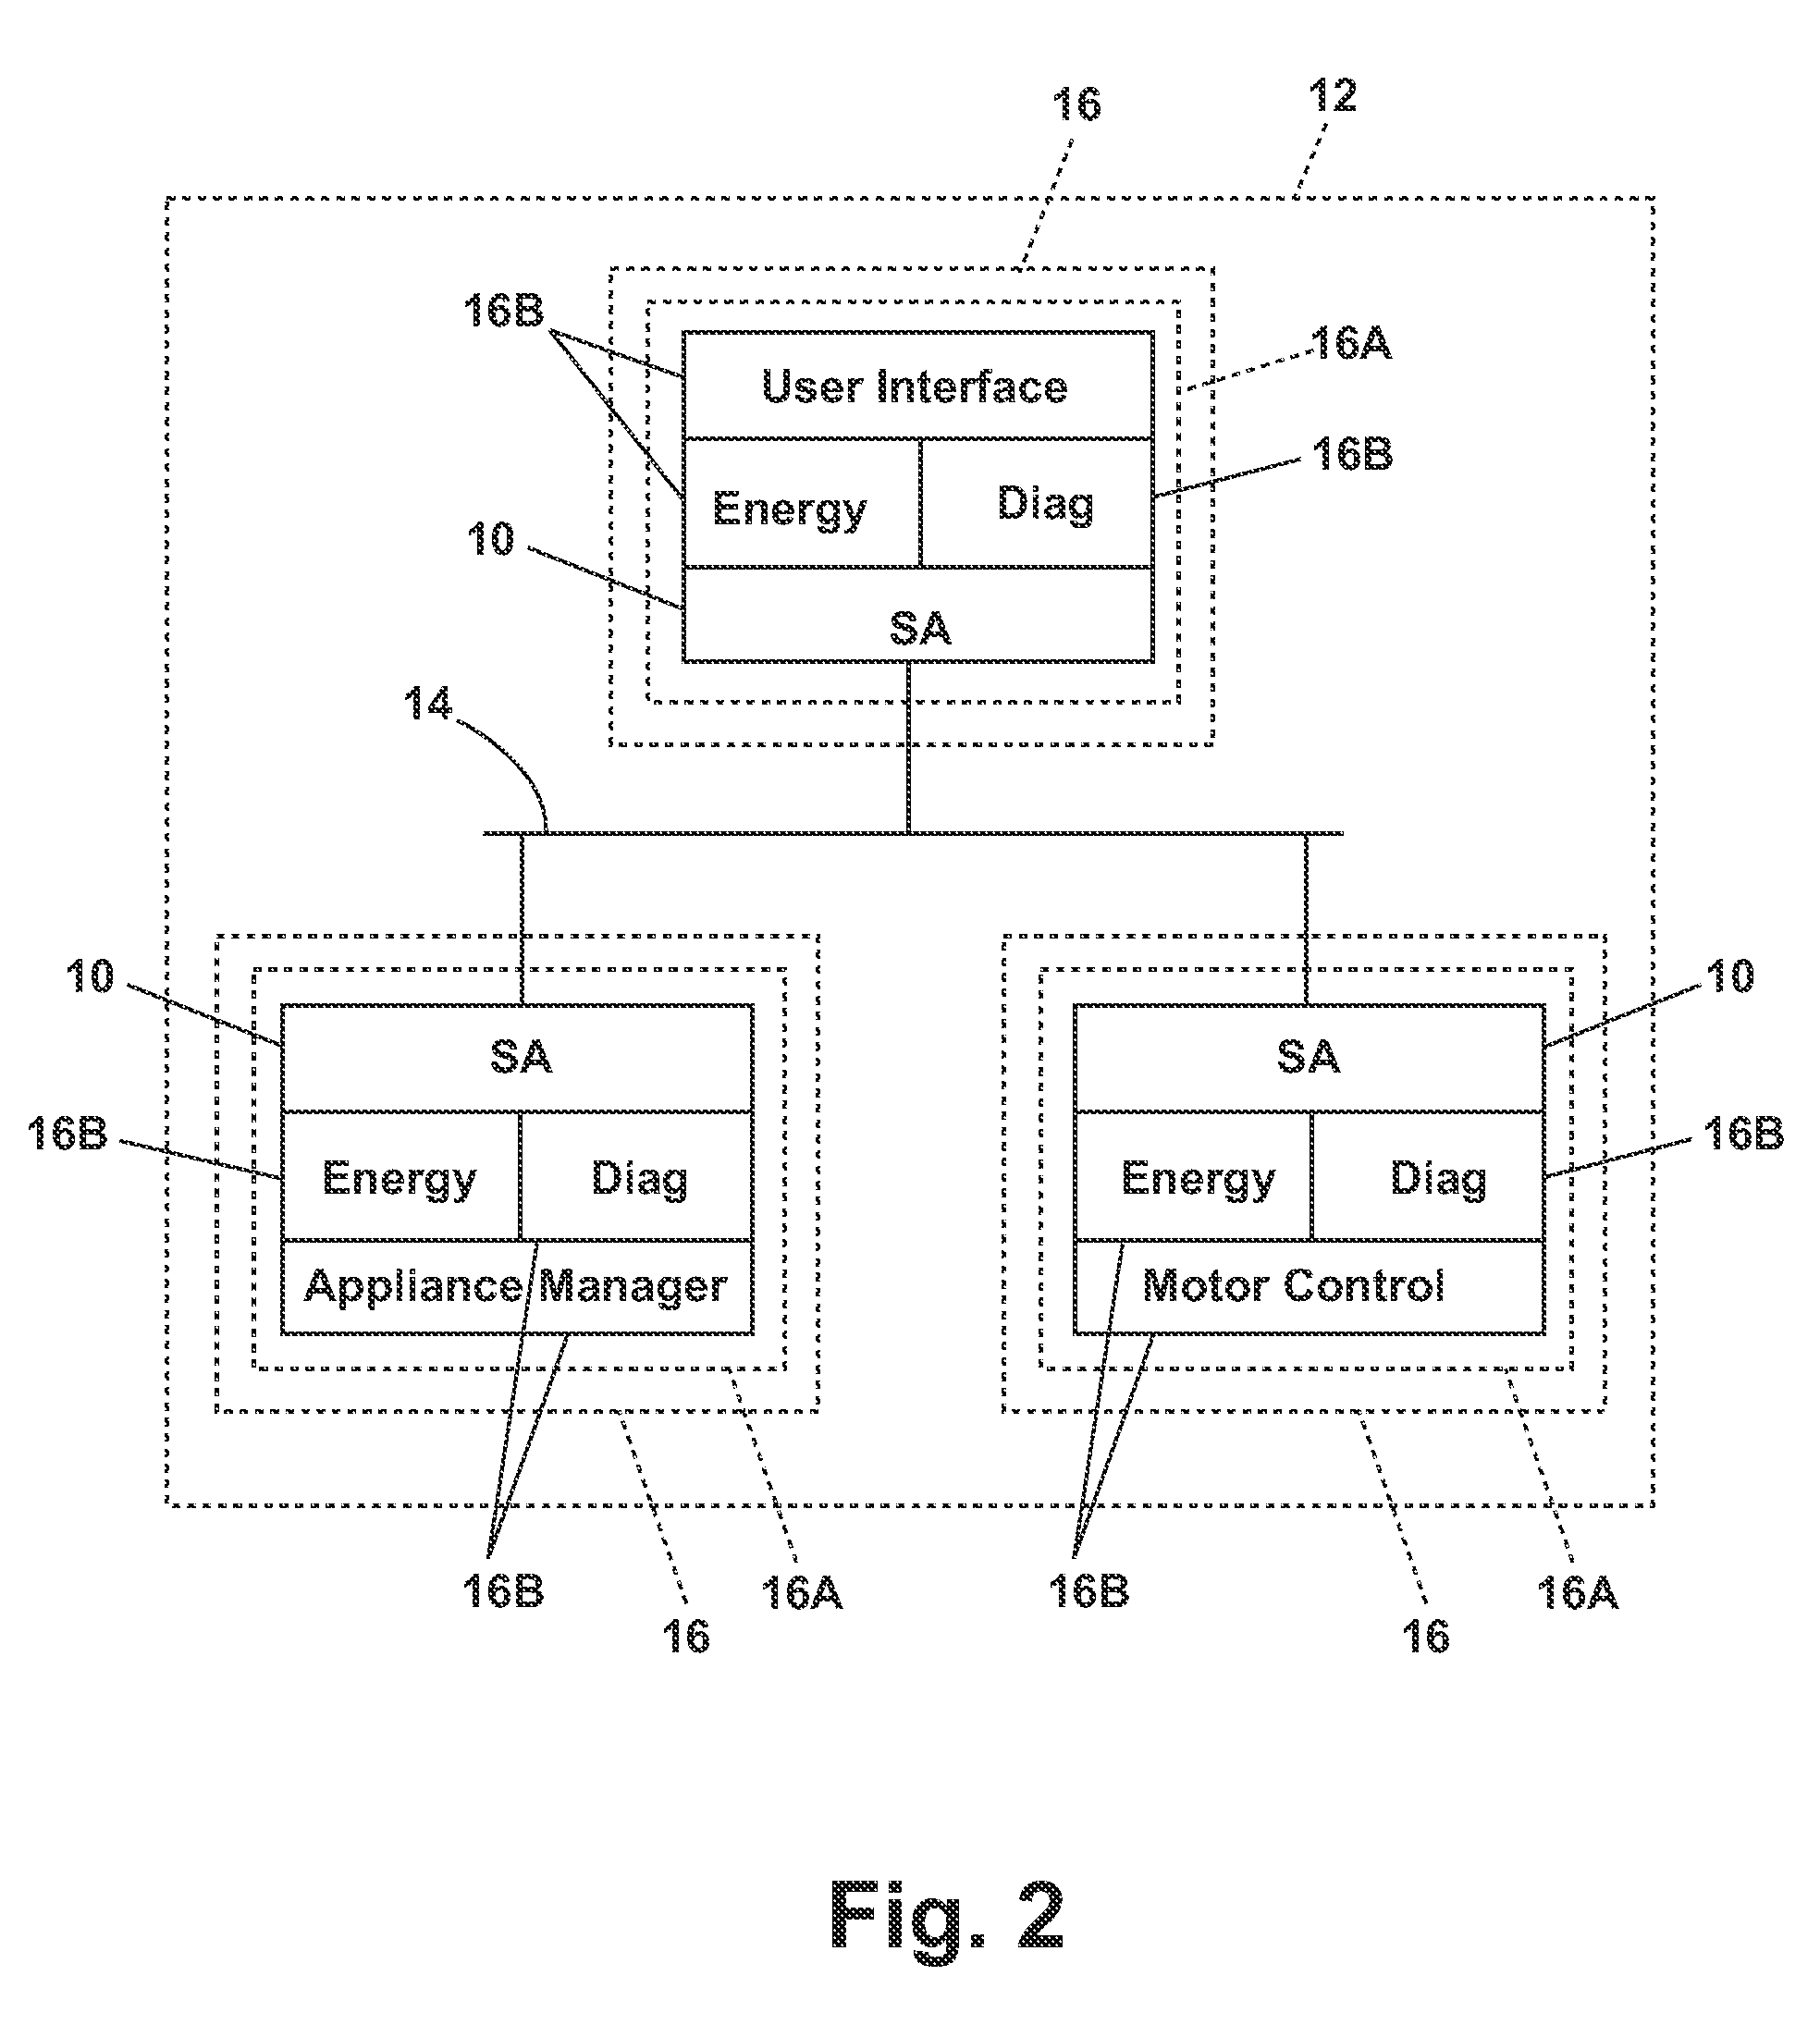 Software architecture system and method for discovering components within an appliance using fuctionality identifiers